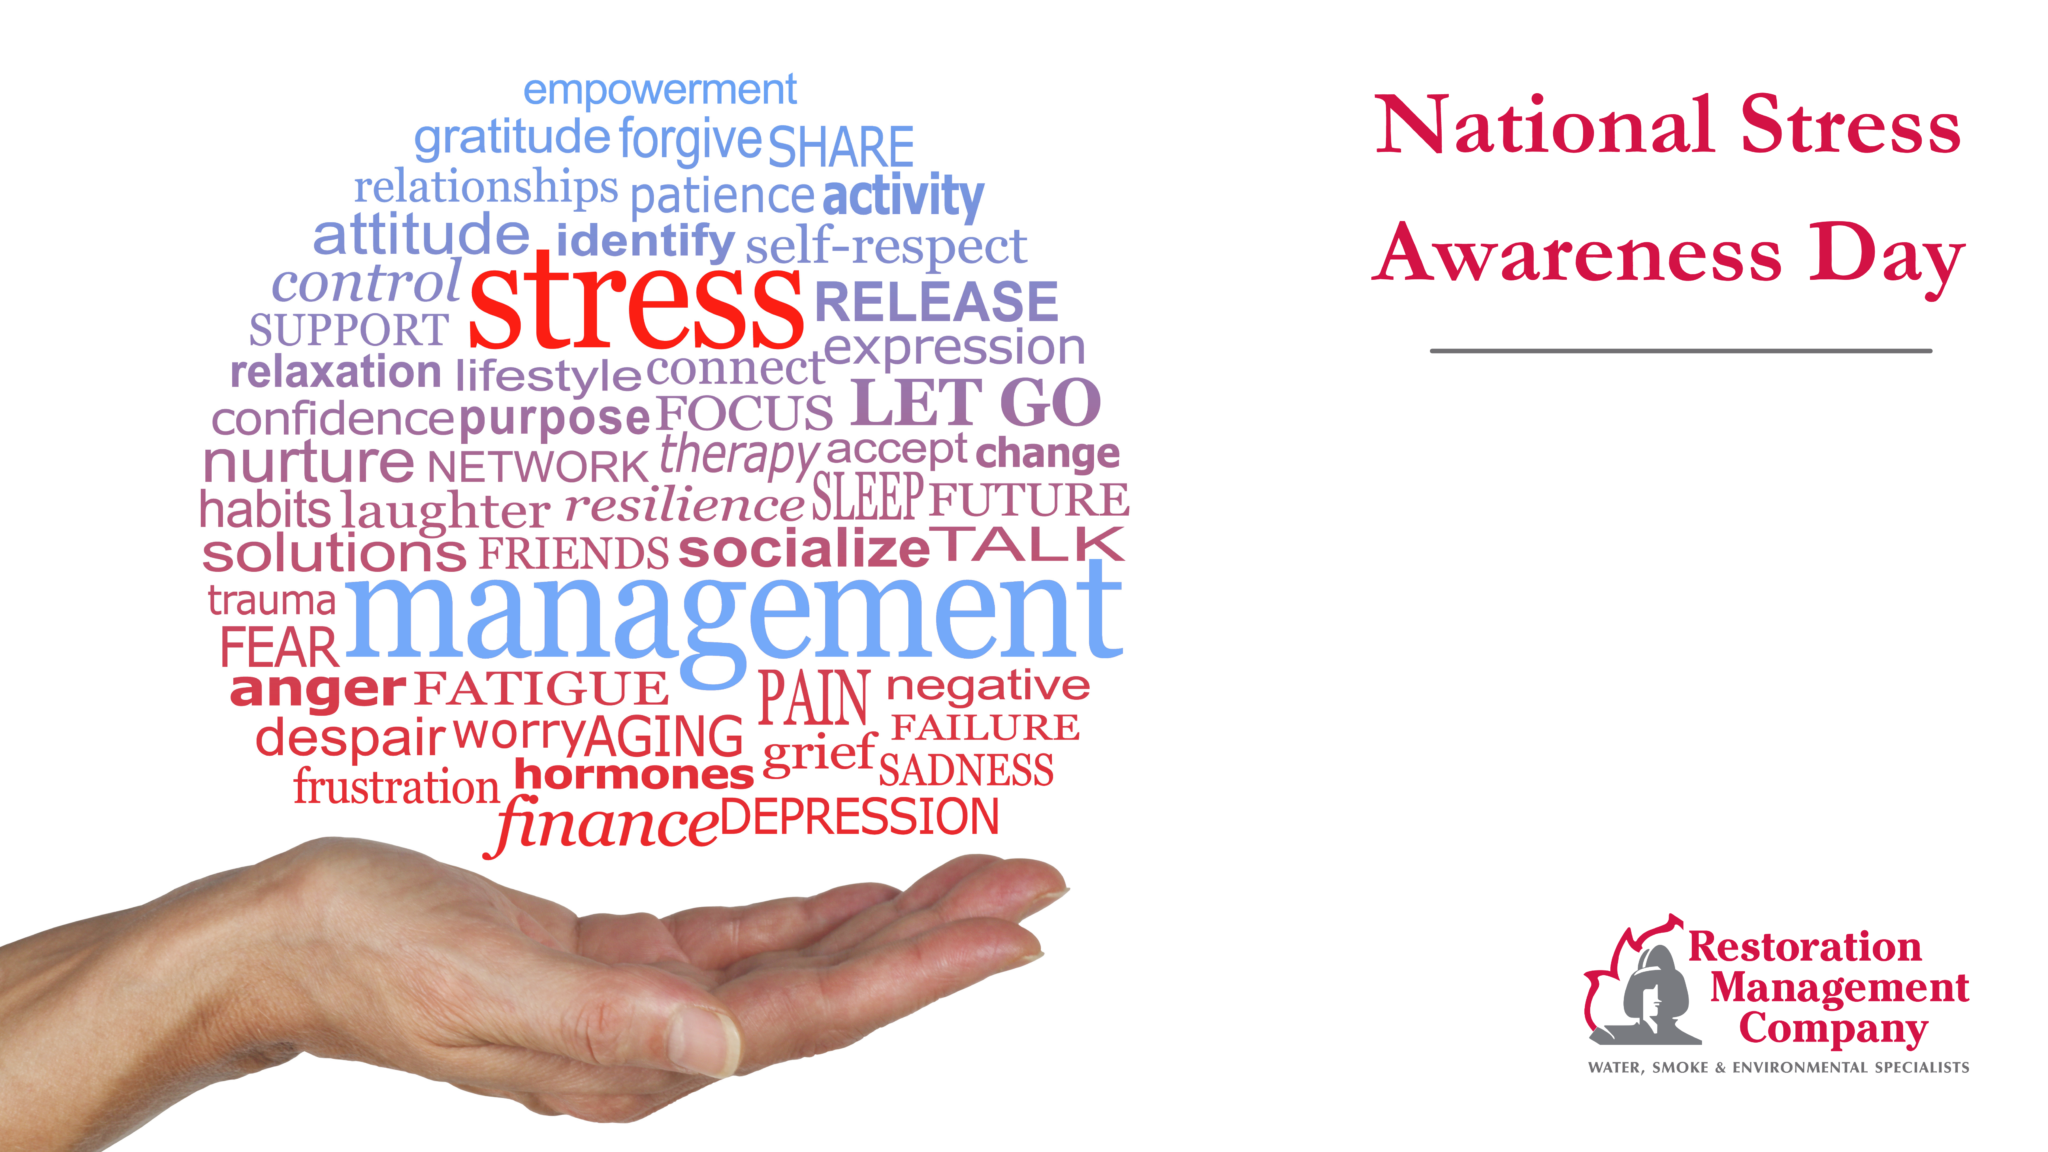 Relieve Stress and Worry National Stress Awareness Day RMC